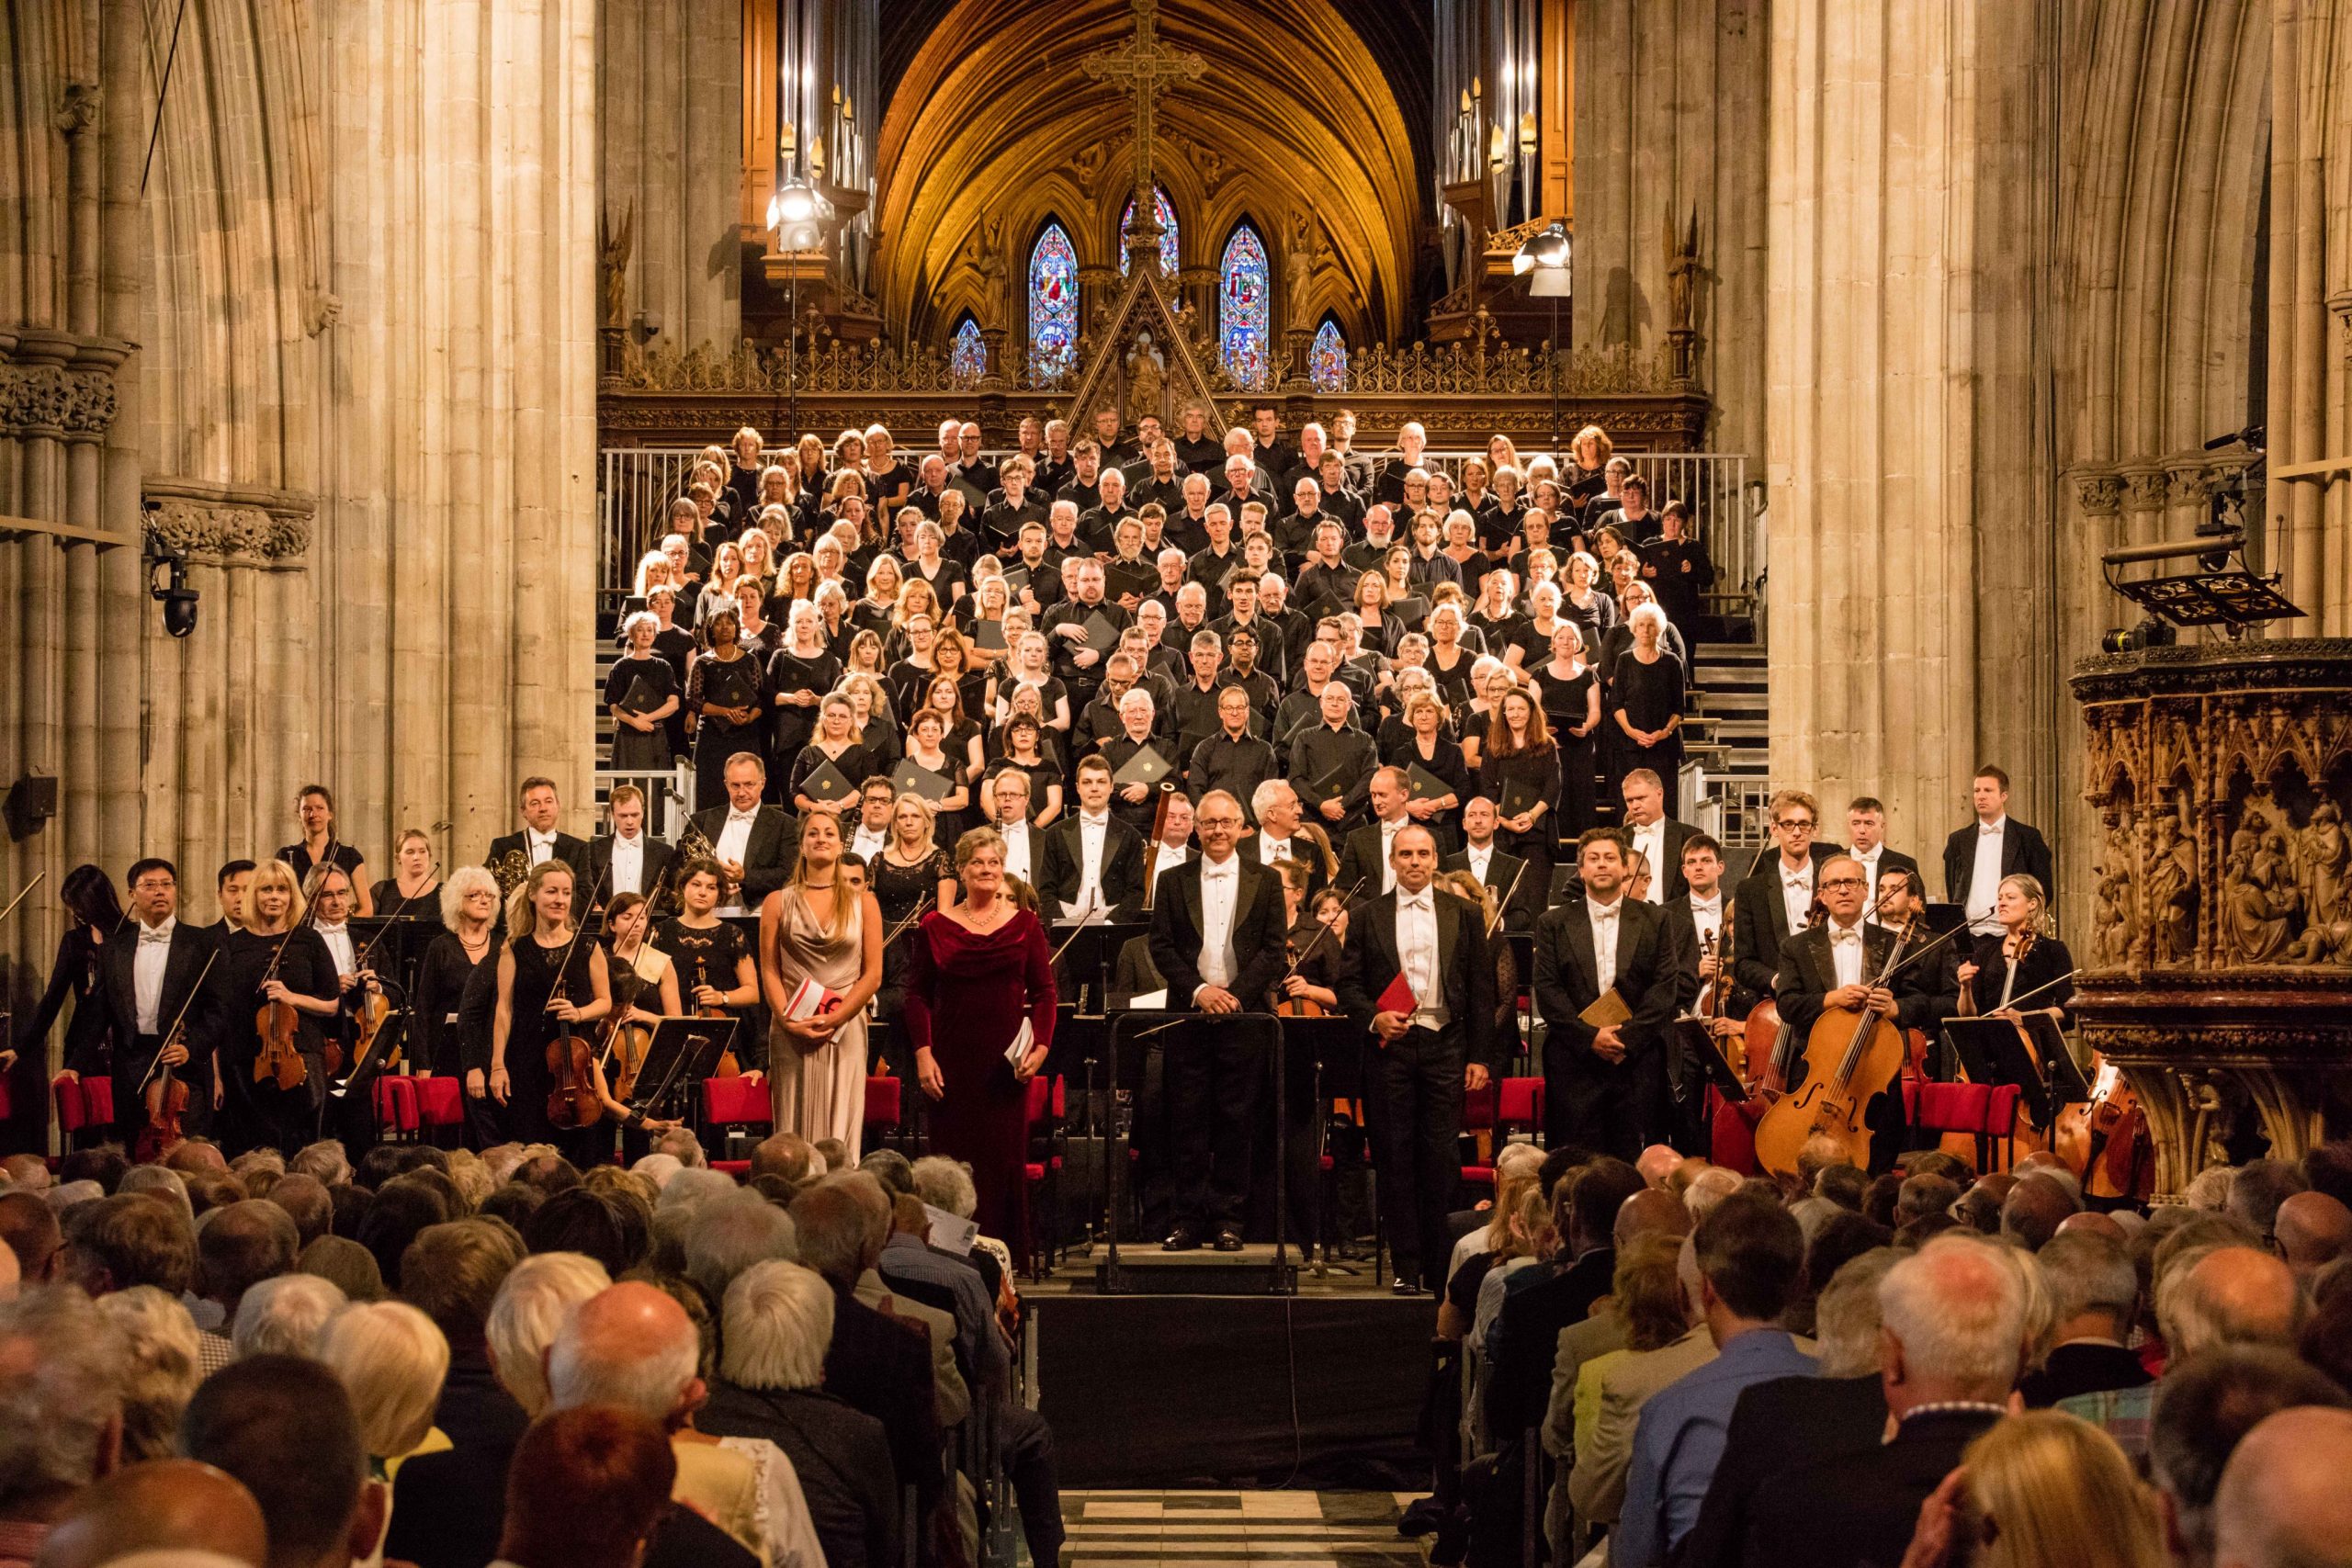 NEWS | Future of Three Choirs Festival secured after government funding is confirmed